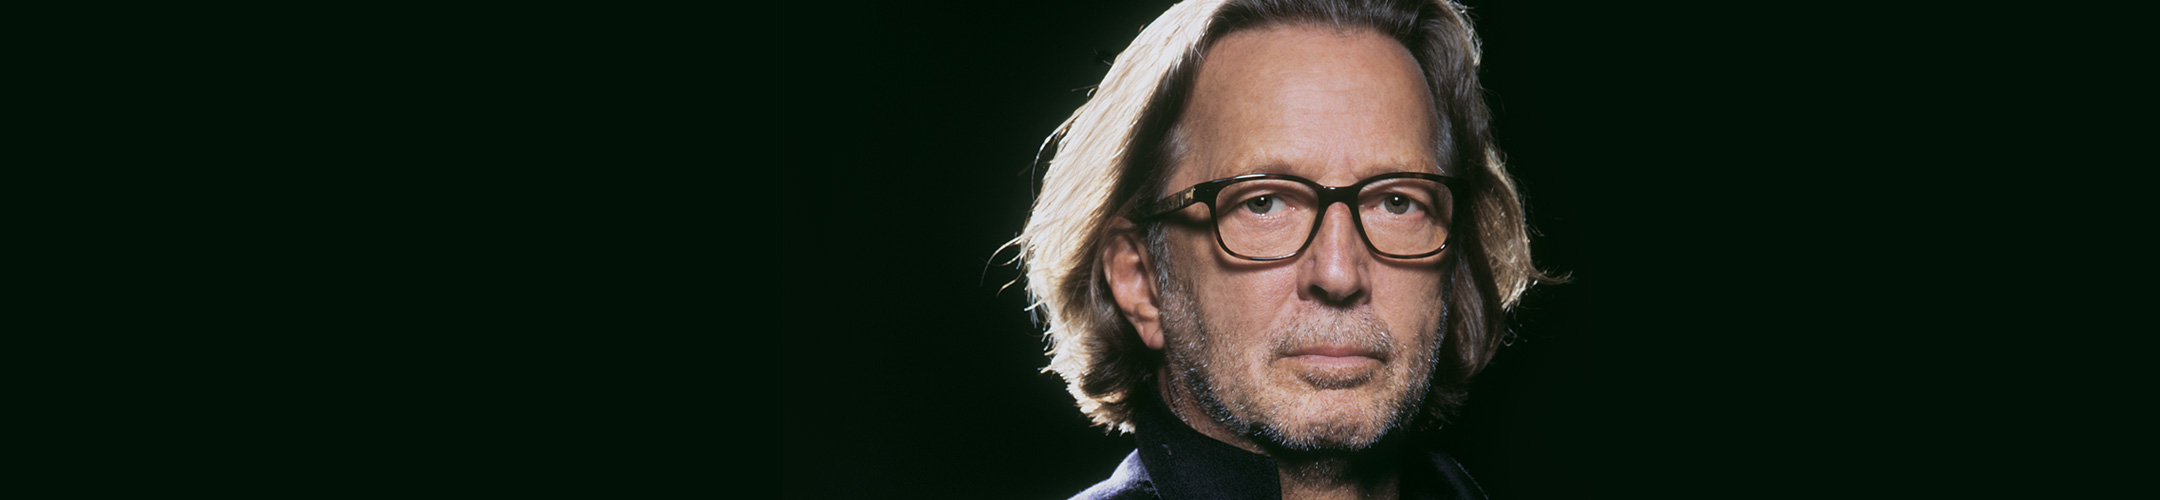 Eric Clapton wallpaper HD background download Facebook Covers ...